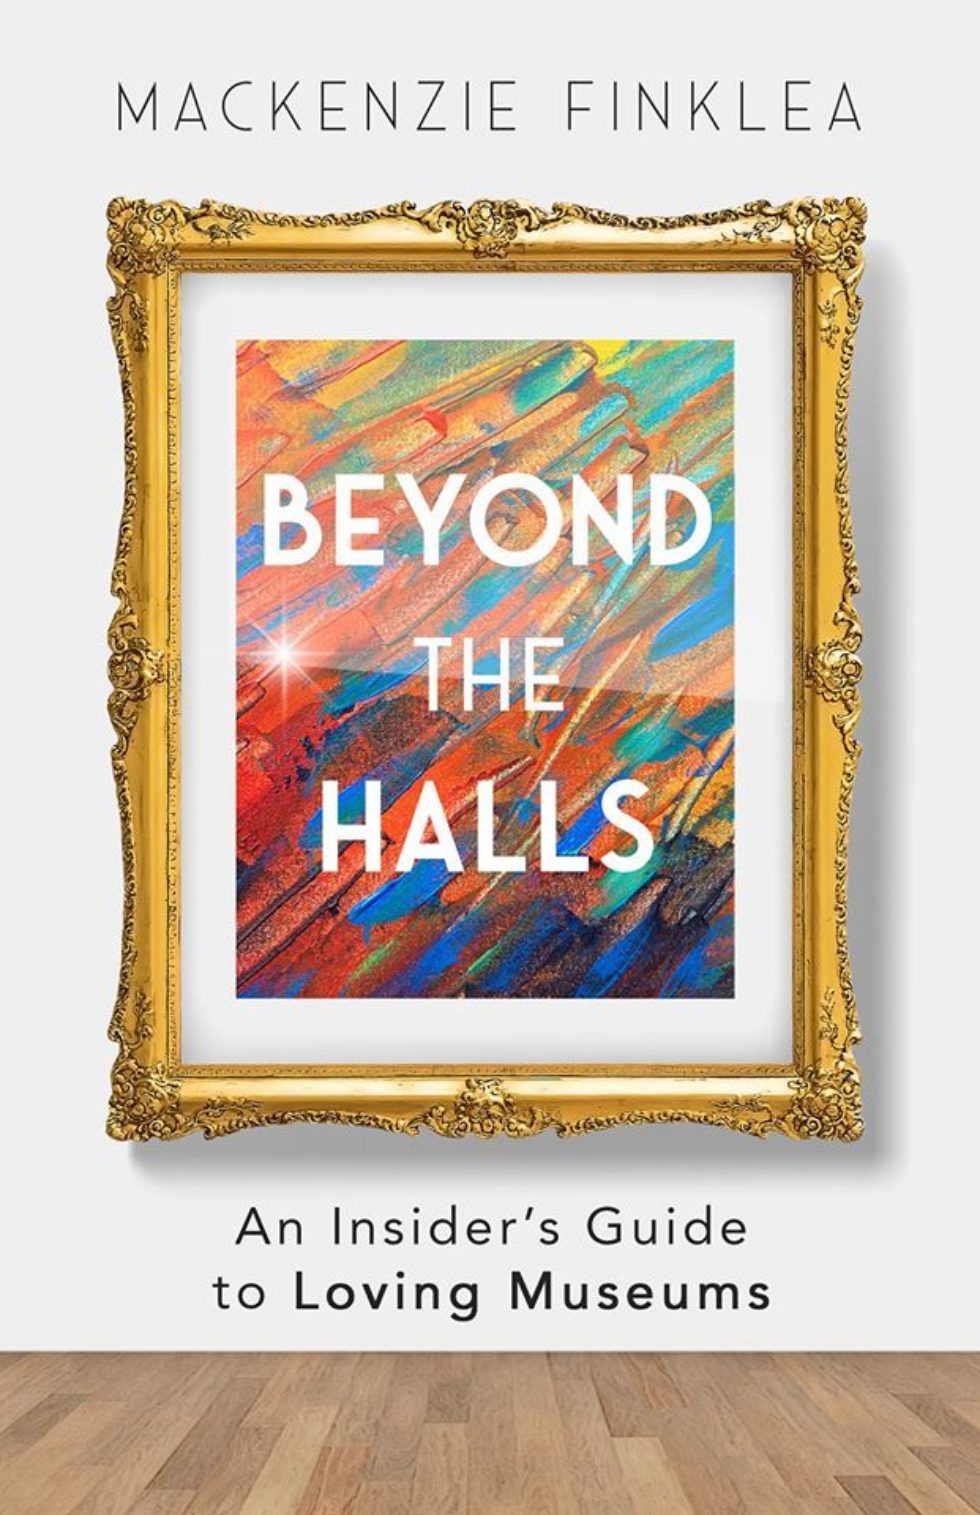  Beyond the Halls: An Insider's Guide to Loving Museums Author Talk and Book Signing